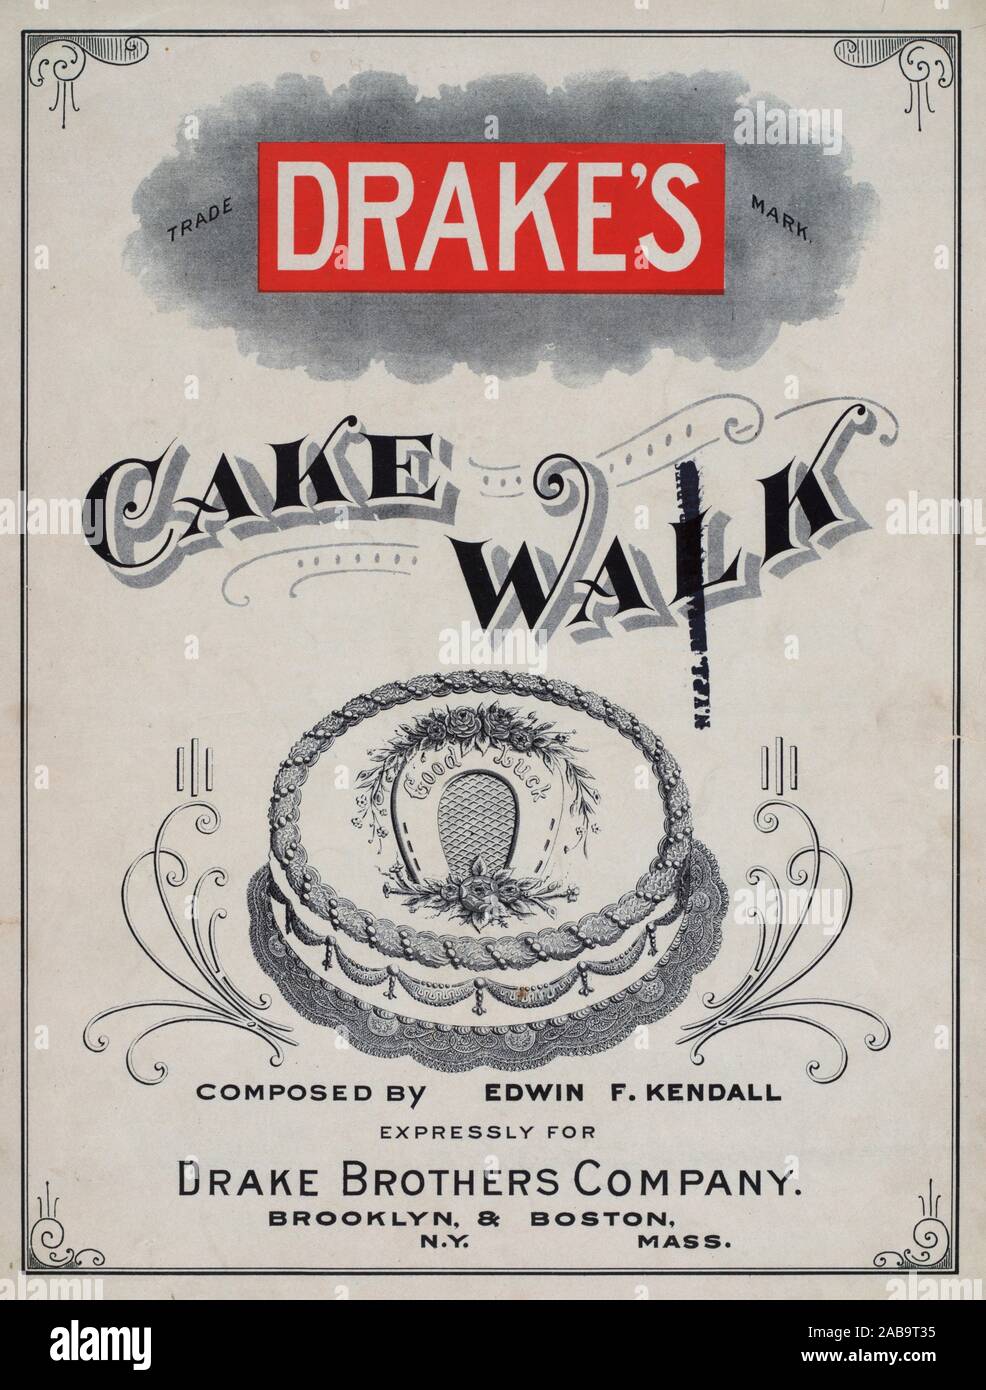 Drake's cake walk Additional title: Drake's cakewalk. Kendall, Edwin F.  (Composer). Popular instrumental sheet music Rags. Date Created: 1909 Place  Stock Photo - Alamy